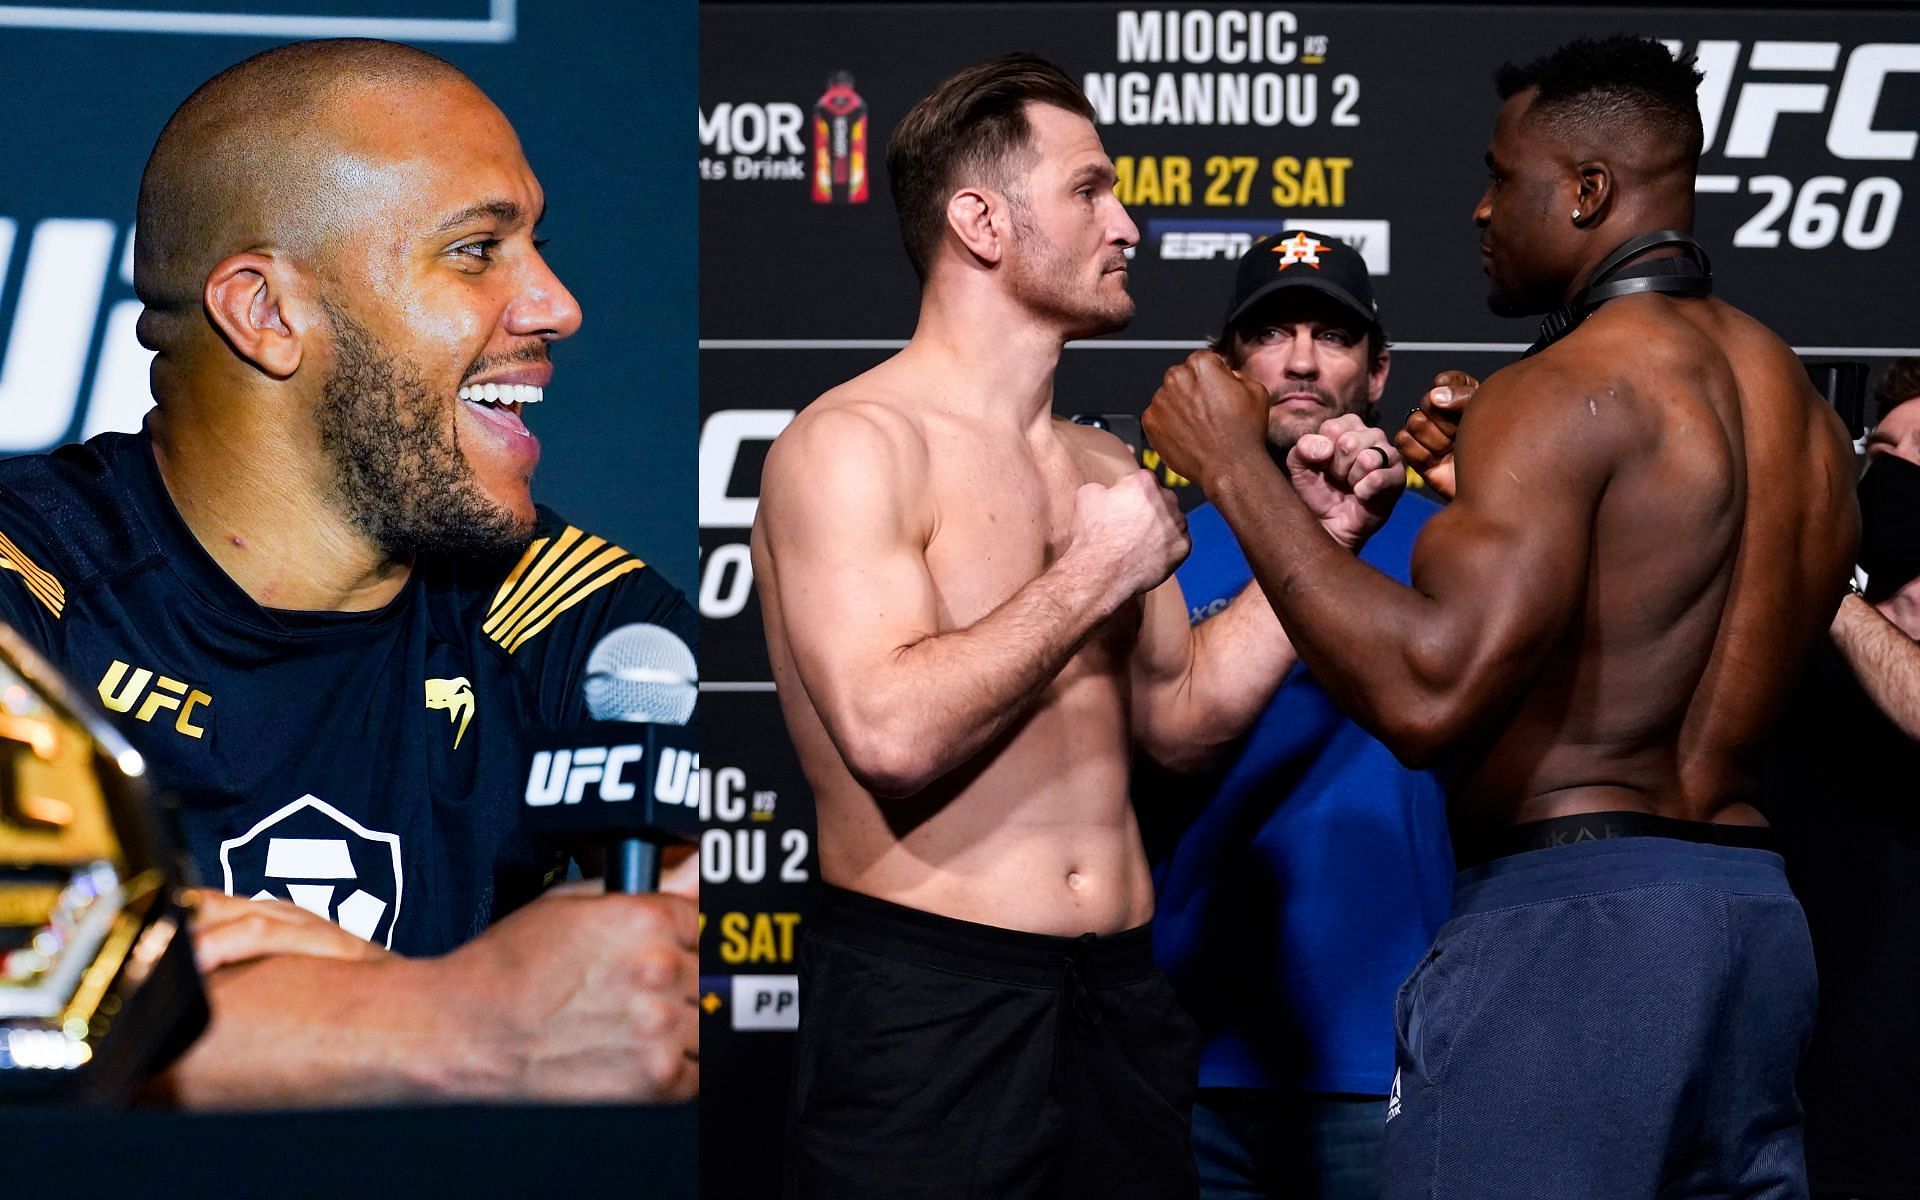 Ciryl Gane at the UFC 265 post-fight press conference (left) and Stipe Miocic with Francis Ngannou at the UFC 260 official weigh-in ceremony (right)